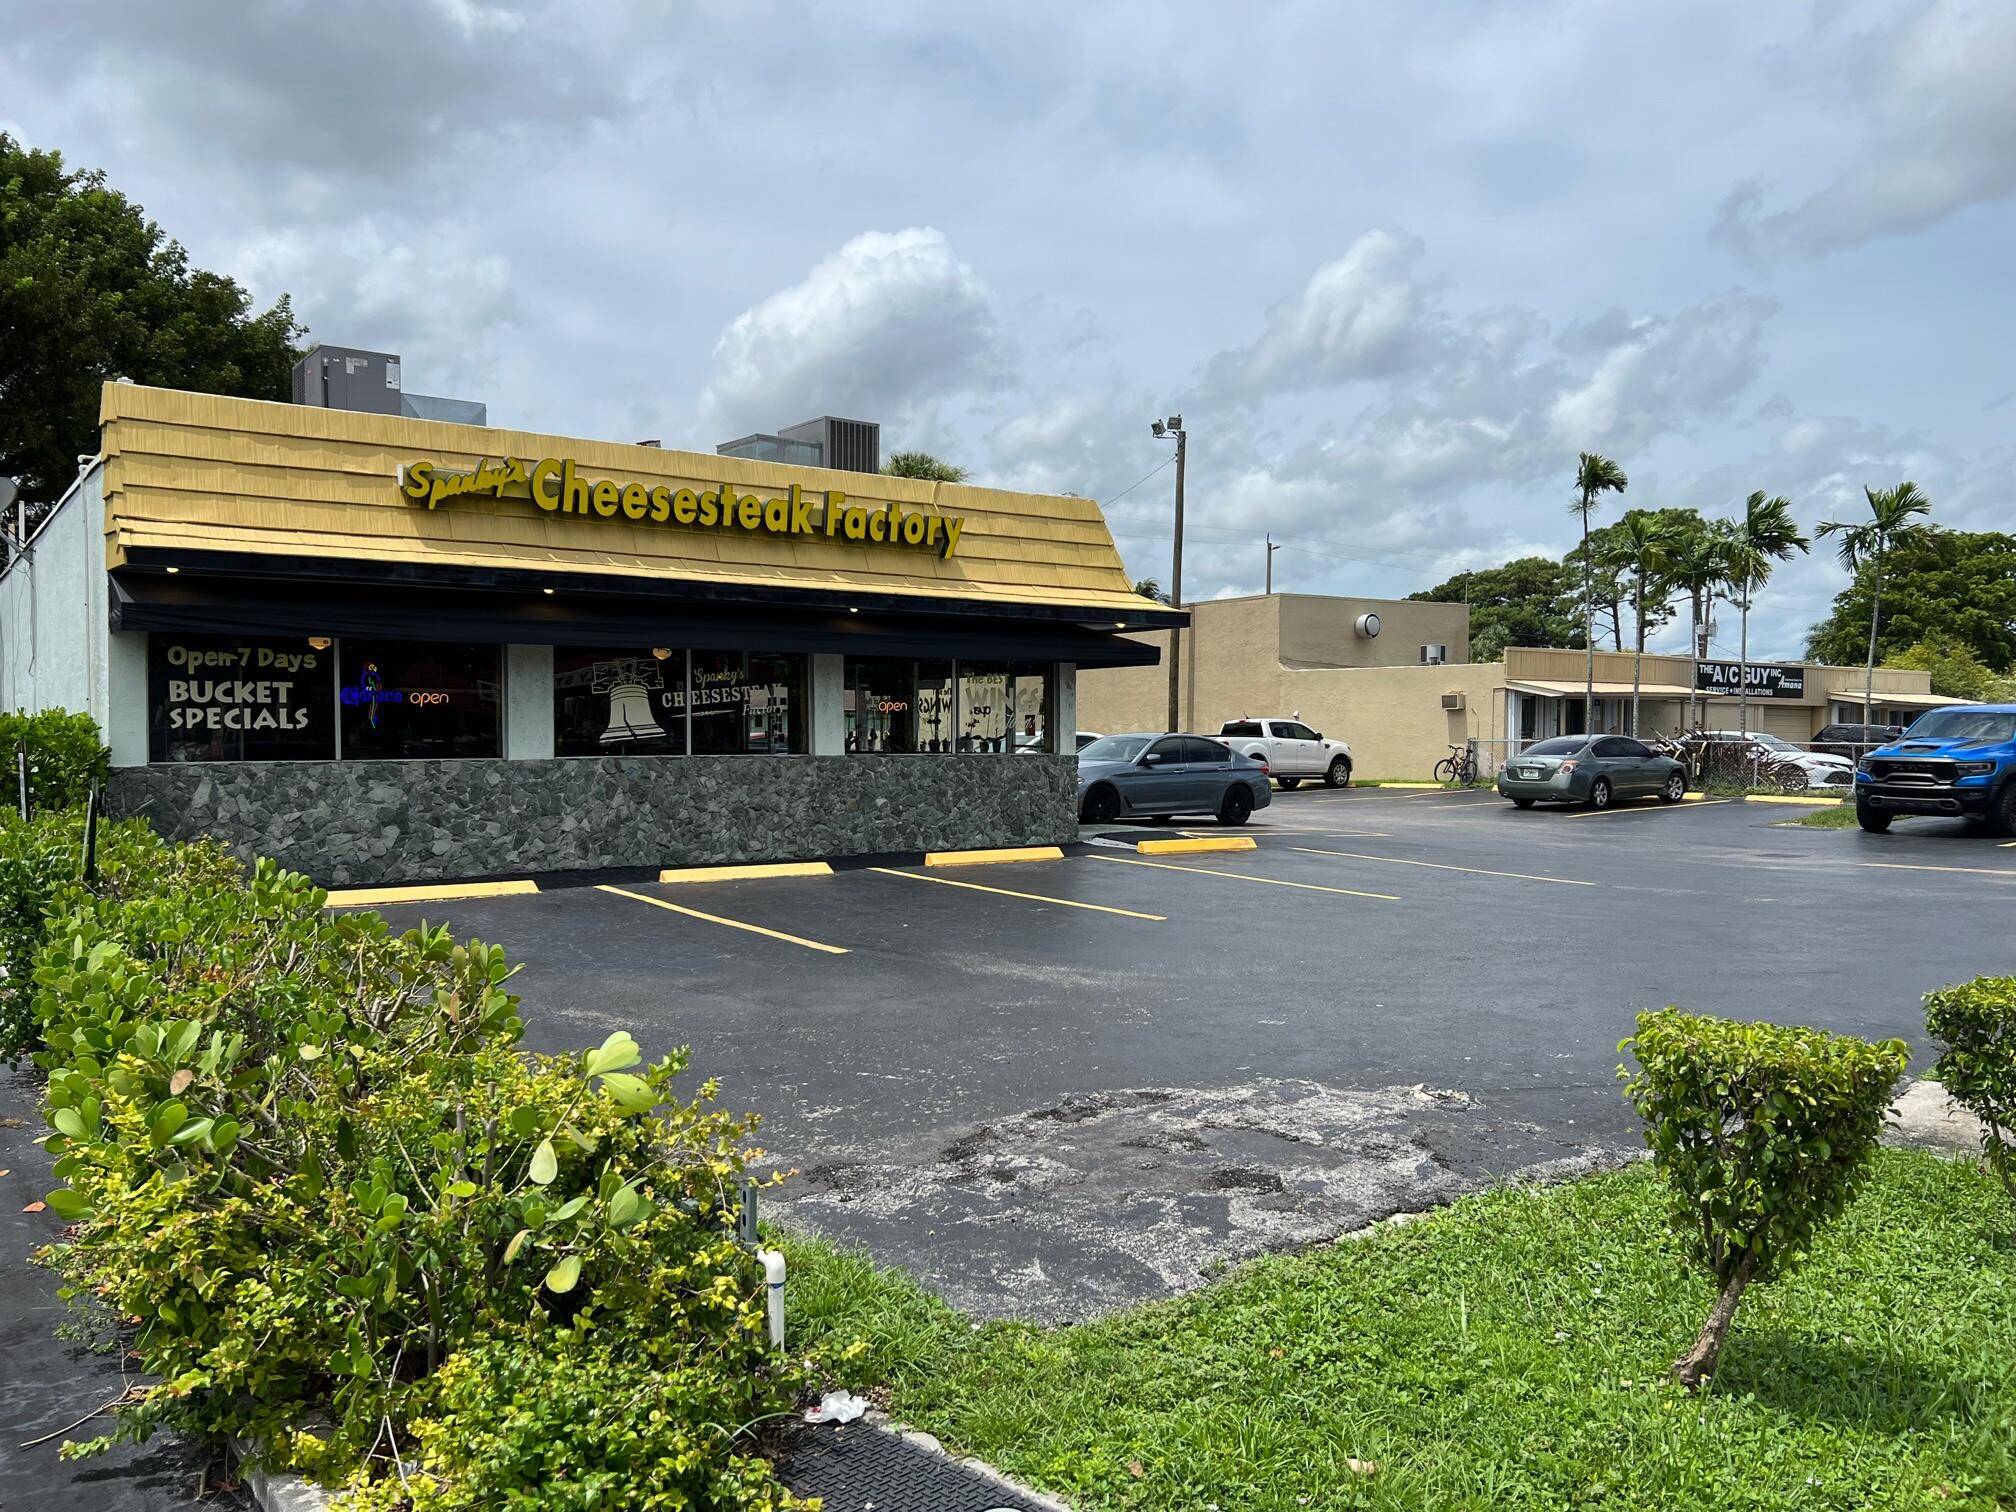 New to market, this freestanding established prime building is located just two blocks South of one of the busiest intersections in Broward County with a 115, 000 daily car count.